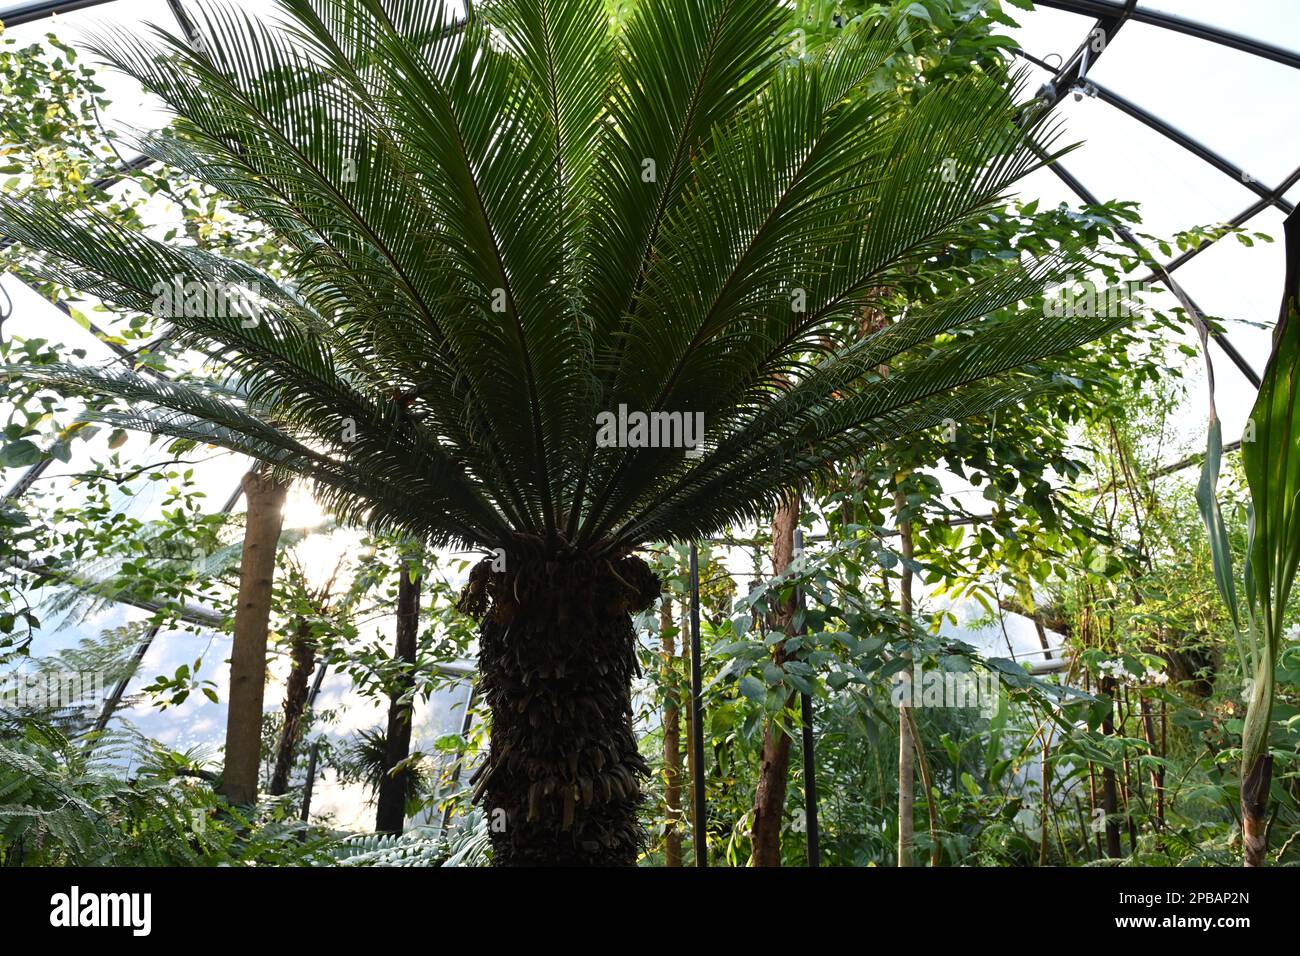 Sago palm in Latin called Cycas revoluta captured in a greenhouse of a botanic garden with various exotic plants. Stock Photo